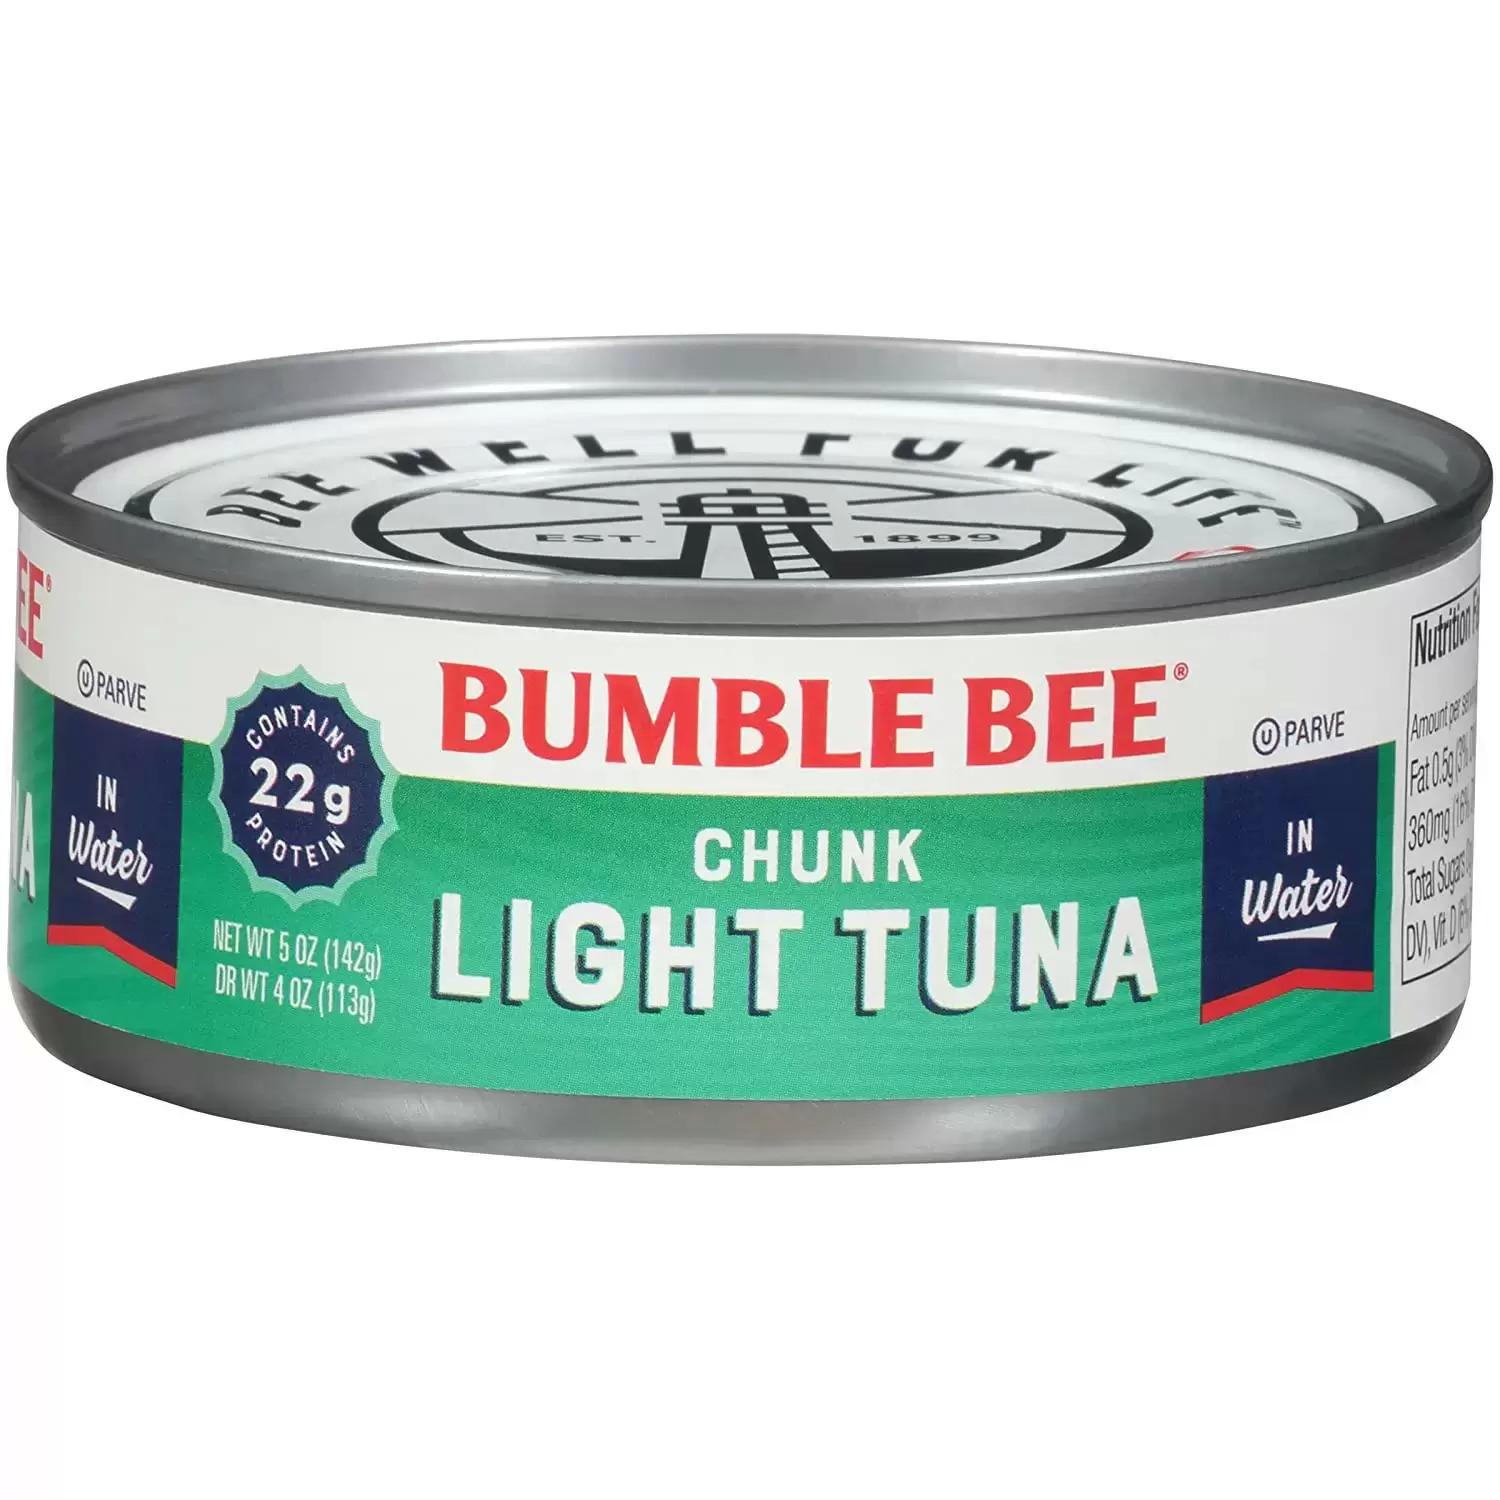 Bumble Bee Chunk Light Tuna In Water 24 Cans for $15.89 Shipped